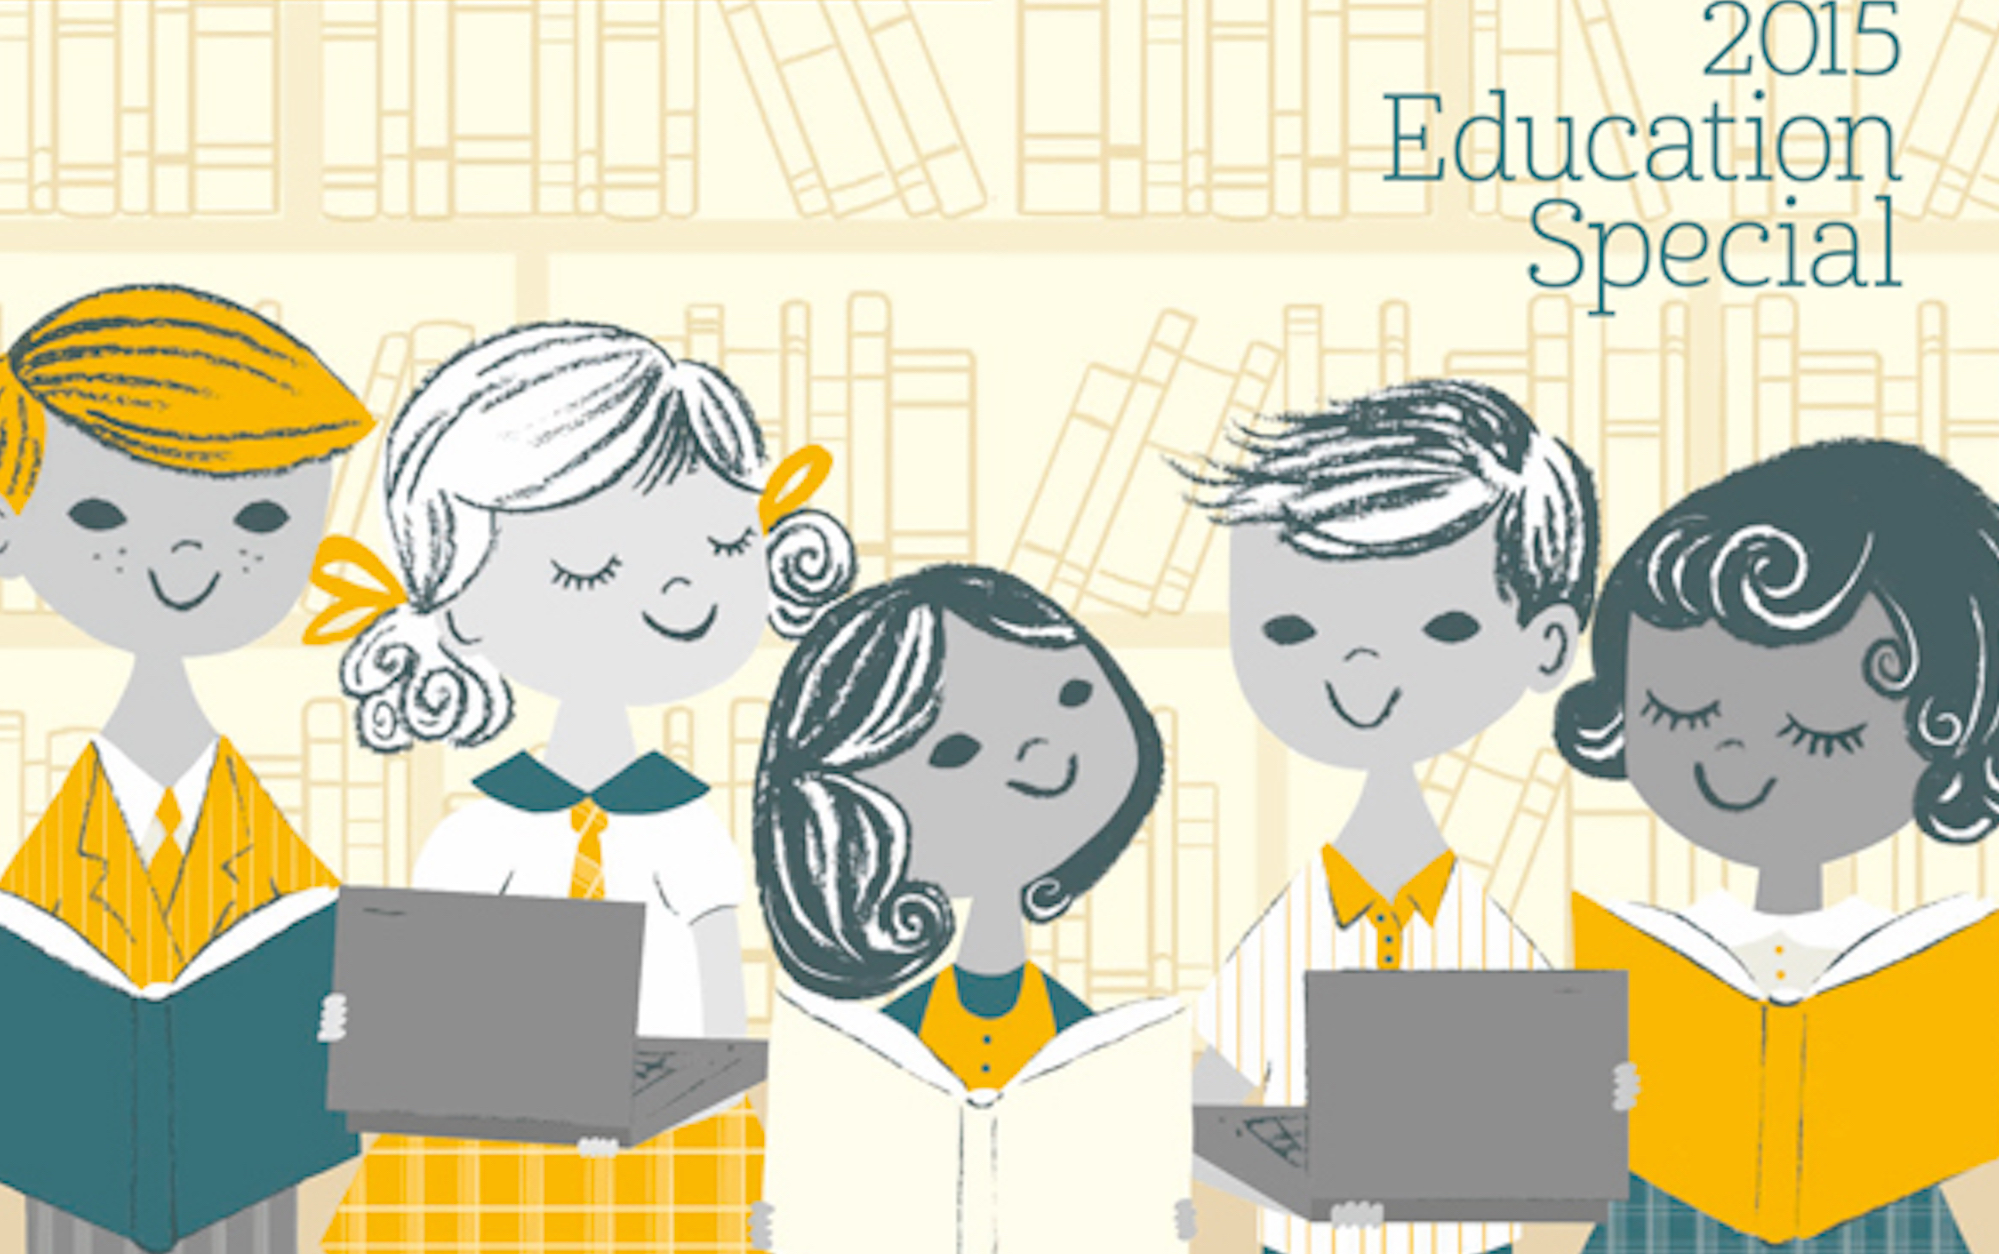 May Issue is out! 2015 Education Special